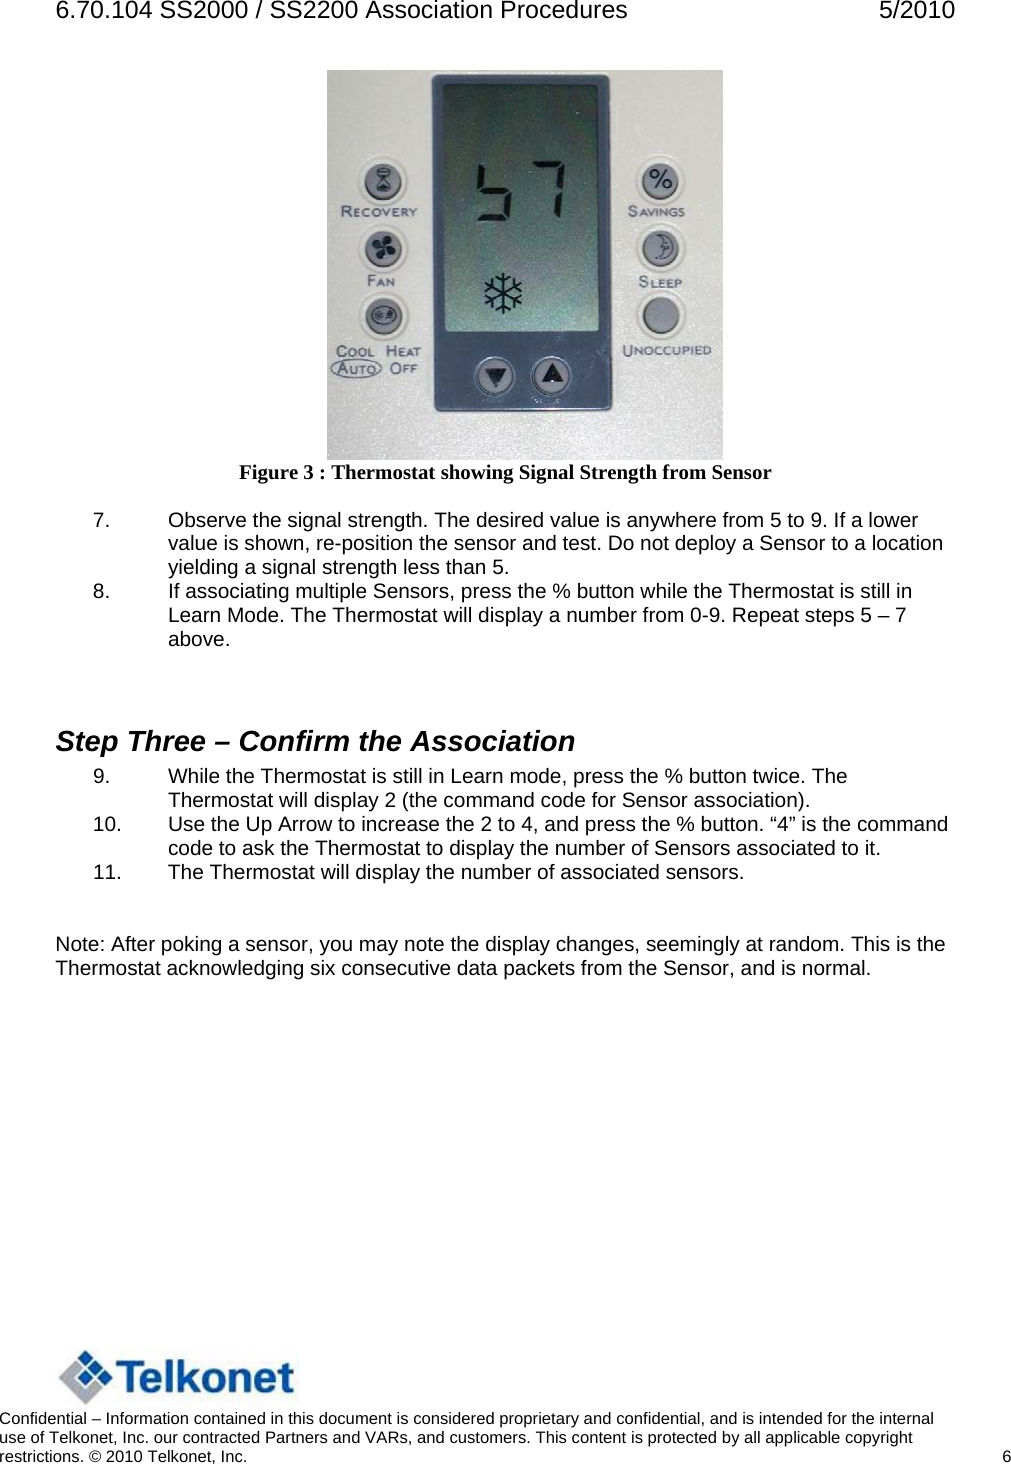 6.70.104 SS2000 / SS2200 Association Procedures  5/2010  Figure 3 : Thermostat showing Signal Strength from Sensor  7.  Observe the signal strength. The desired value is anywhere from 5 to 9. If a lower value is shown, re-position the sensor and test. Do not deploy a Sensor to a location yielding a signal strength less than 5. 8.  If associating multiple Sensors, press the % button while the Thermostat is still in Learn Mode. The Thermostat will display a number from 0-9. Repeat steps 5 – 7 above.   Step Three – Confirm the Association 9.  While the Thermostat is still in Learn mode, press the % button twice. The Thermostat will display 2 (the command code for Sensor association). 10.  Use the Up Arrow to increase the 2 to 4, and press the % button. “4” is the command code to ask the Thermostat to display the number of Sensors associated to it. 11.  The Thermostat will display the number of associated sensors.   Note: After poking a sensor, you may note the display changes, seemingly at random. This is the Thermostat acknowledging six consecutive data packets from the Sensor, and is normal.        Confidential – Information contained in this document is considered proprietary and confidential, and is intended for the internal use of Telkonet, Inc. our contracted Partners and VARs, and customers. This content is protected by all applicable copyright restrictions. © 2010 Telkonet, Inc.    6  